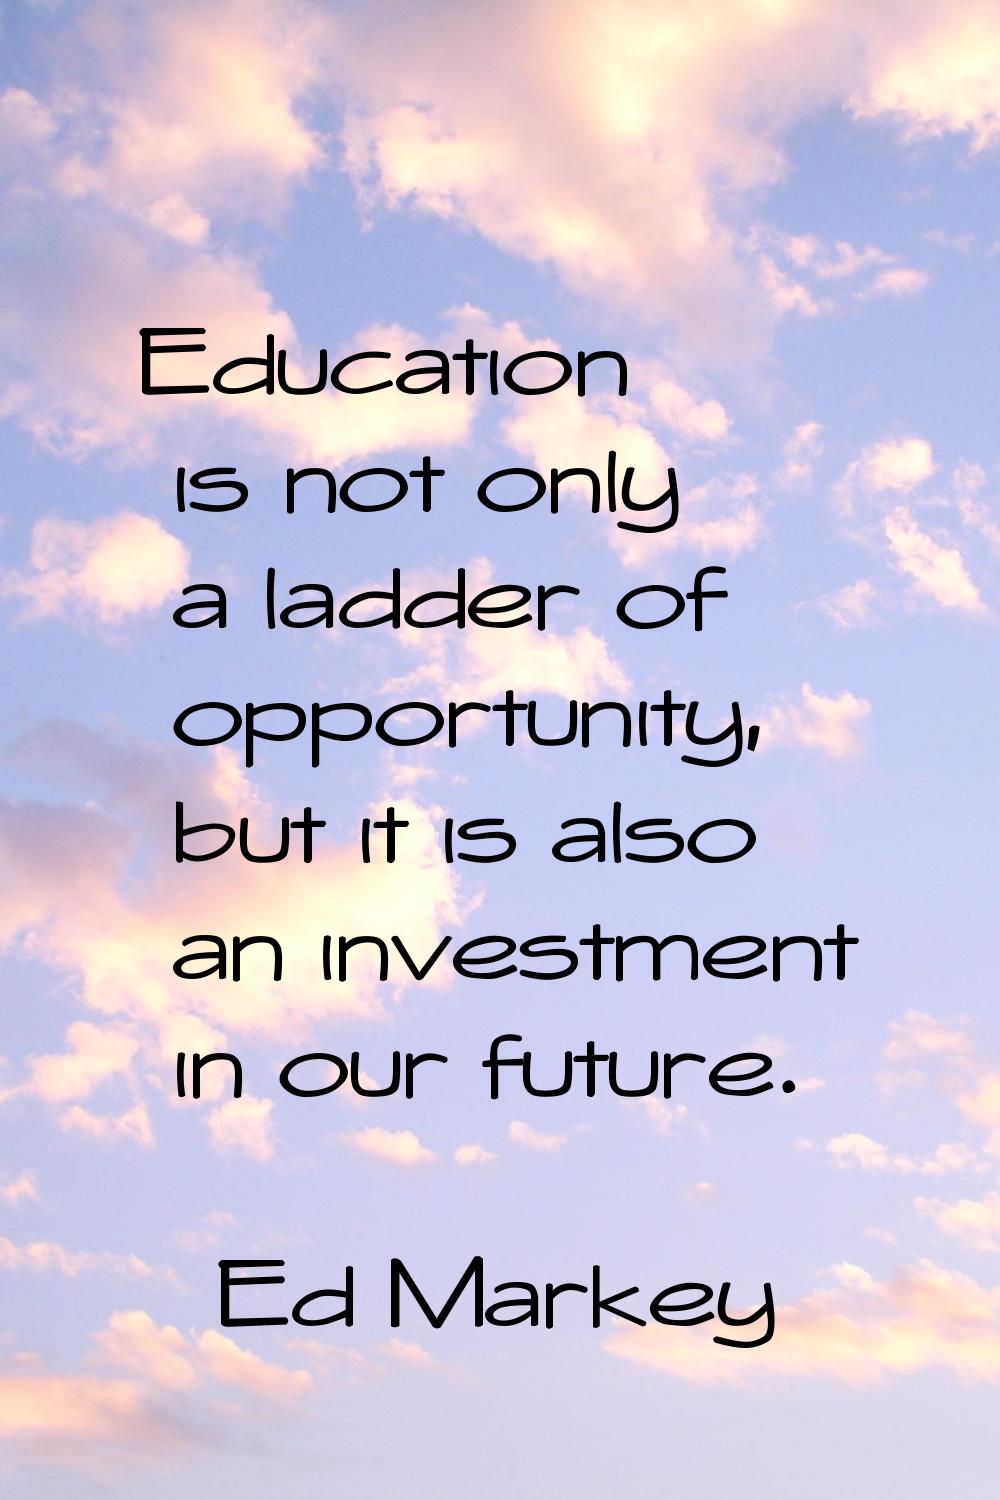 Education is not only a ladder of opportunity, but it is also an investment in our future.